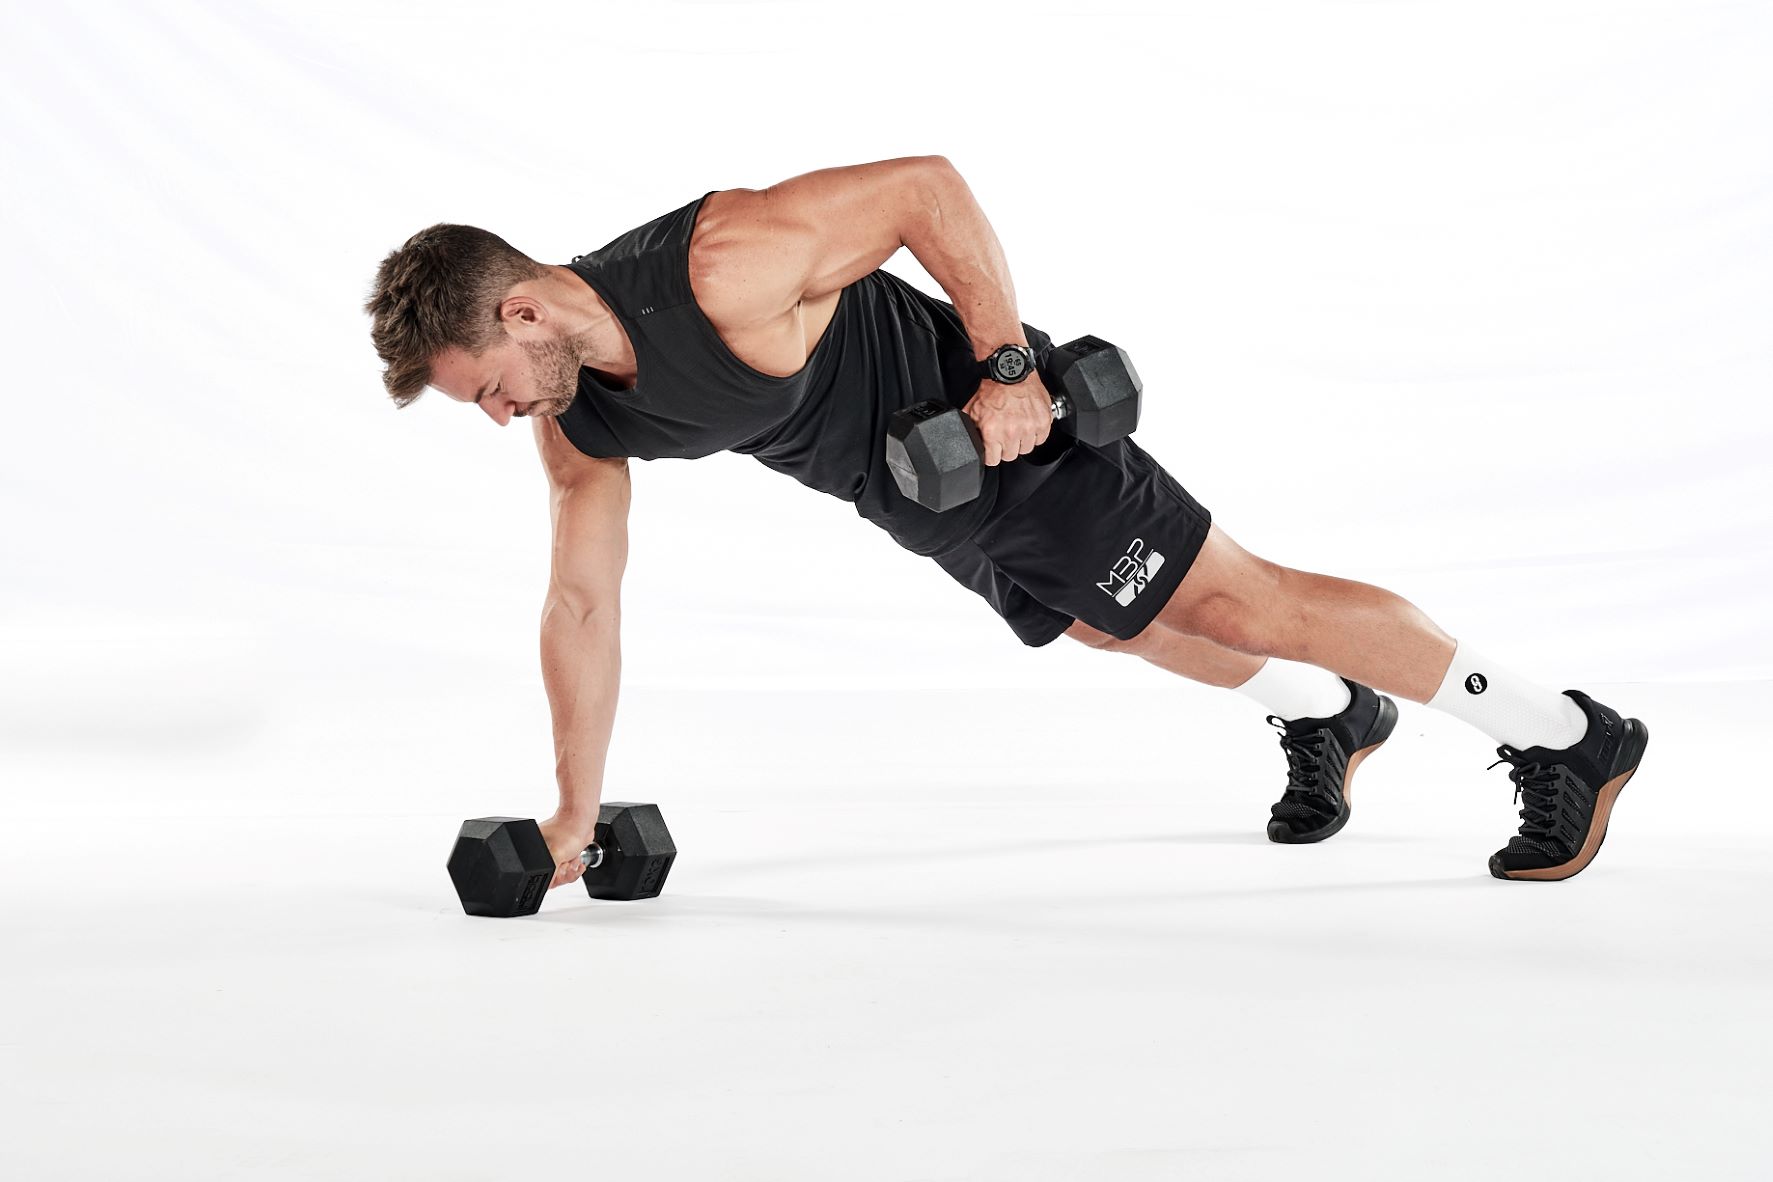 Three stages of the dumbbell renegade row – in a press-up position, holding a dumbbell in each hand; rowing up towards the hip with one hand; rowing up towards the hip with the other.